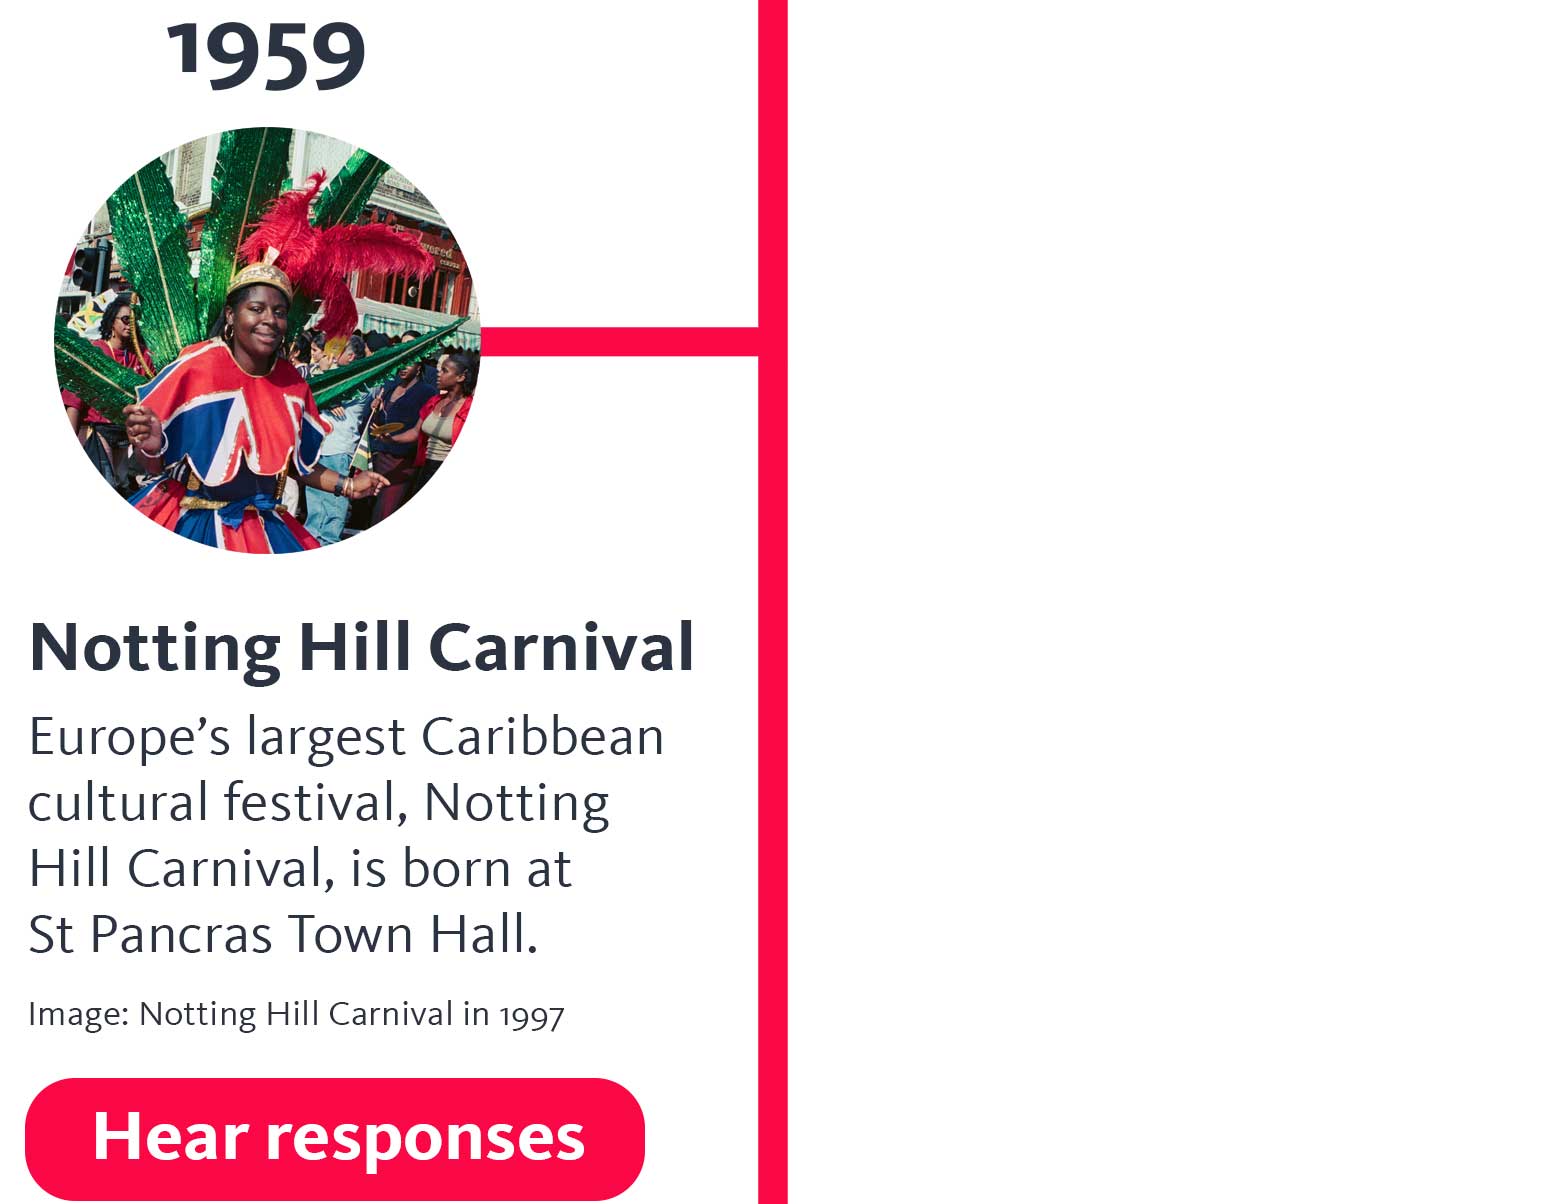 The year '1959' appears above a colour photo of a woman dancing in a colourful, feathered Union Jack dress. A heading below says 'Notting Hill Carnival', and text below that says 'Europes's largest Caribbean cultural festival, Notting Hill Carnival, is born at St Pancras Town Hall.' and below that, 'Image: Notting Hill Carnival in 1997', and a button says 'Hear responses'.